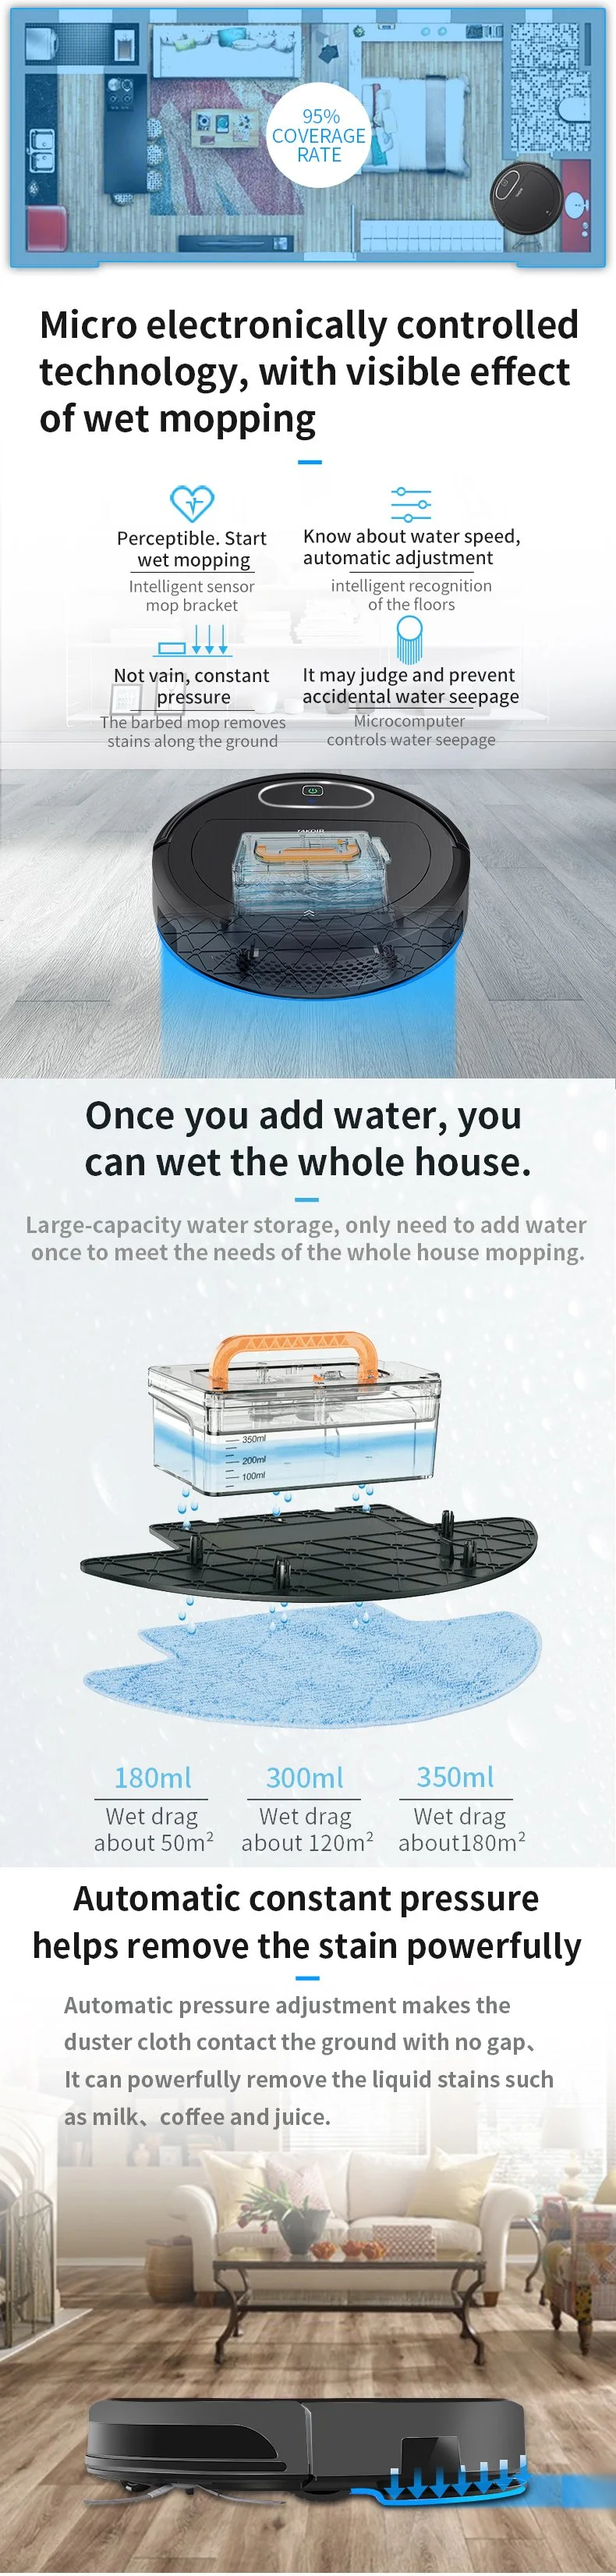 Robot Vacuum, 3 in 1 Strong Suction Mopping Cleaner with 2600mAh Battery Capacity, Anti-Collision Sensor Automatic Home Cleaning for Pet Hair, Carpet and Hard F